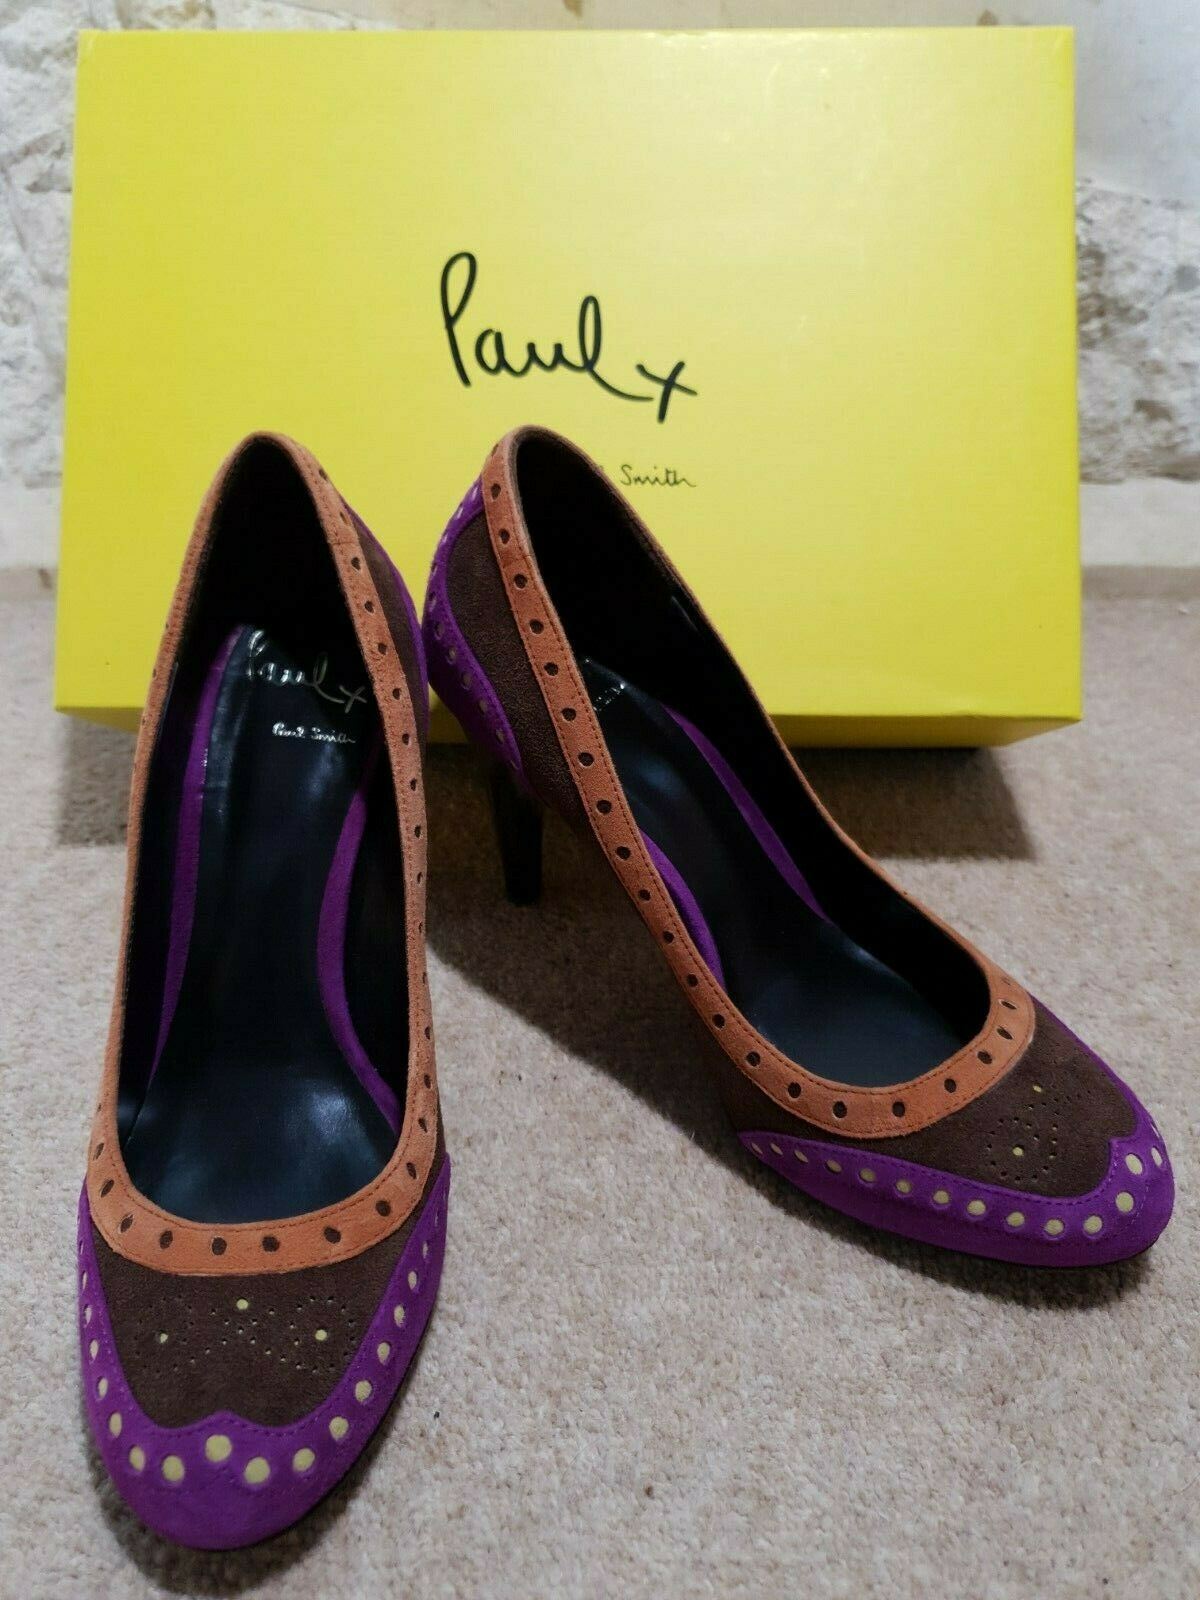 Paul Smith Multicoloured Suede Brogue Style Court Shoes UK 6 US 8 EU 39 Timeless Fashions